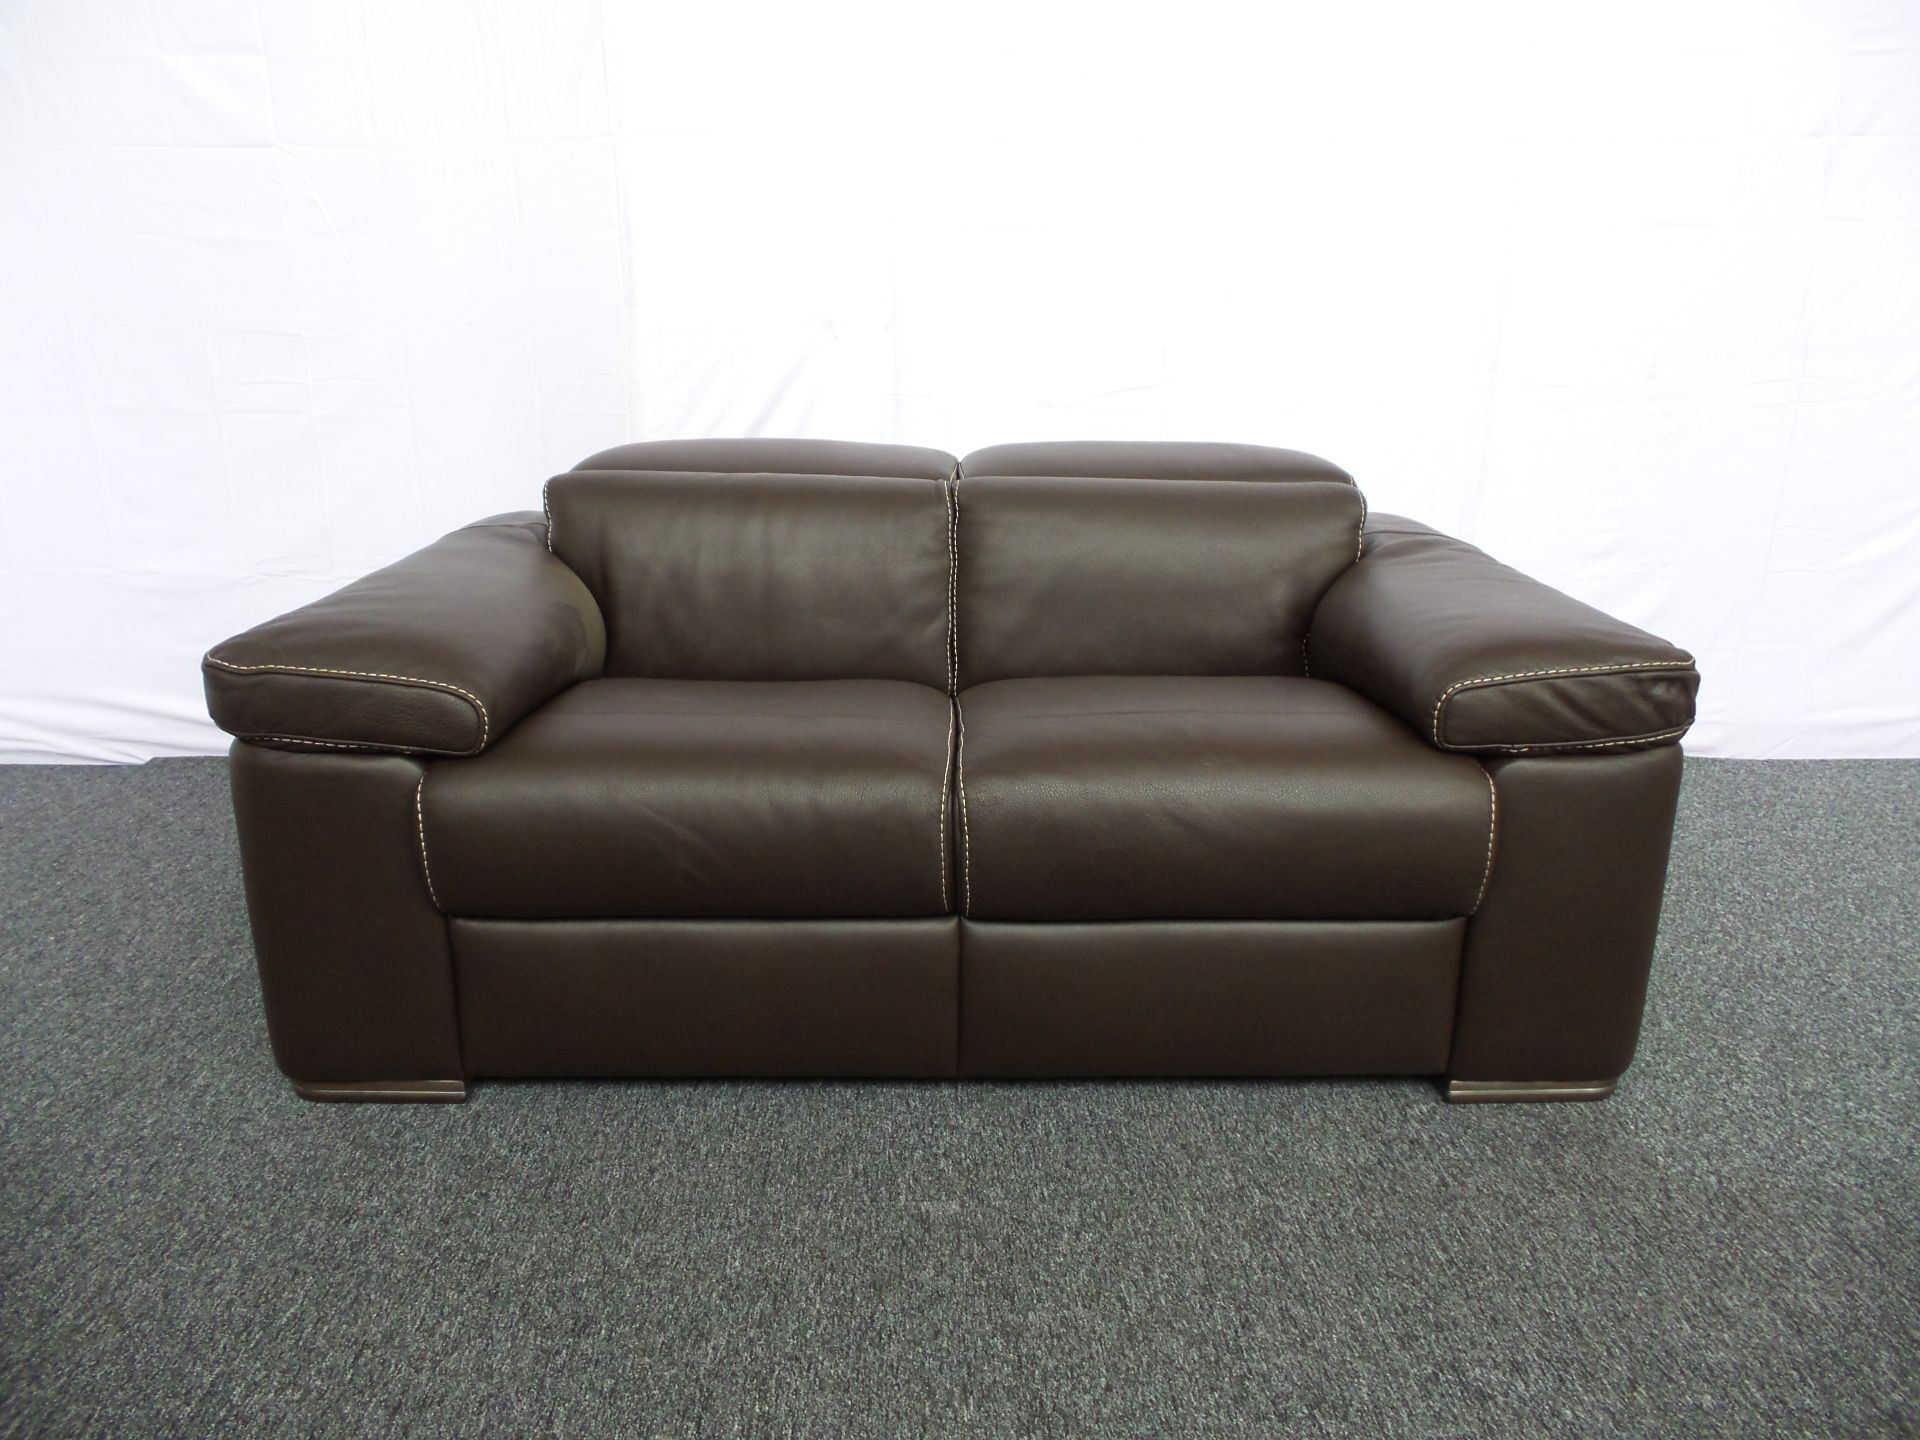 NATUZZI EDITIONS DESIGNER - 2 Seater Brown Leather Sofa Adjustable Headrests Sofa Dimensions: Height